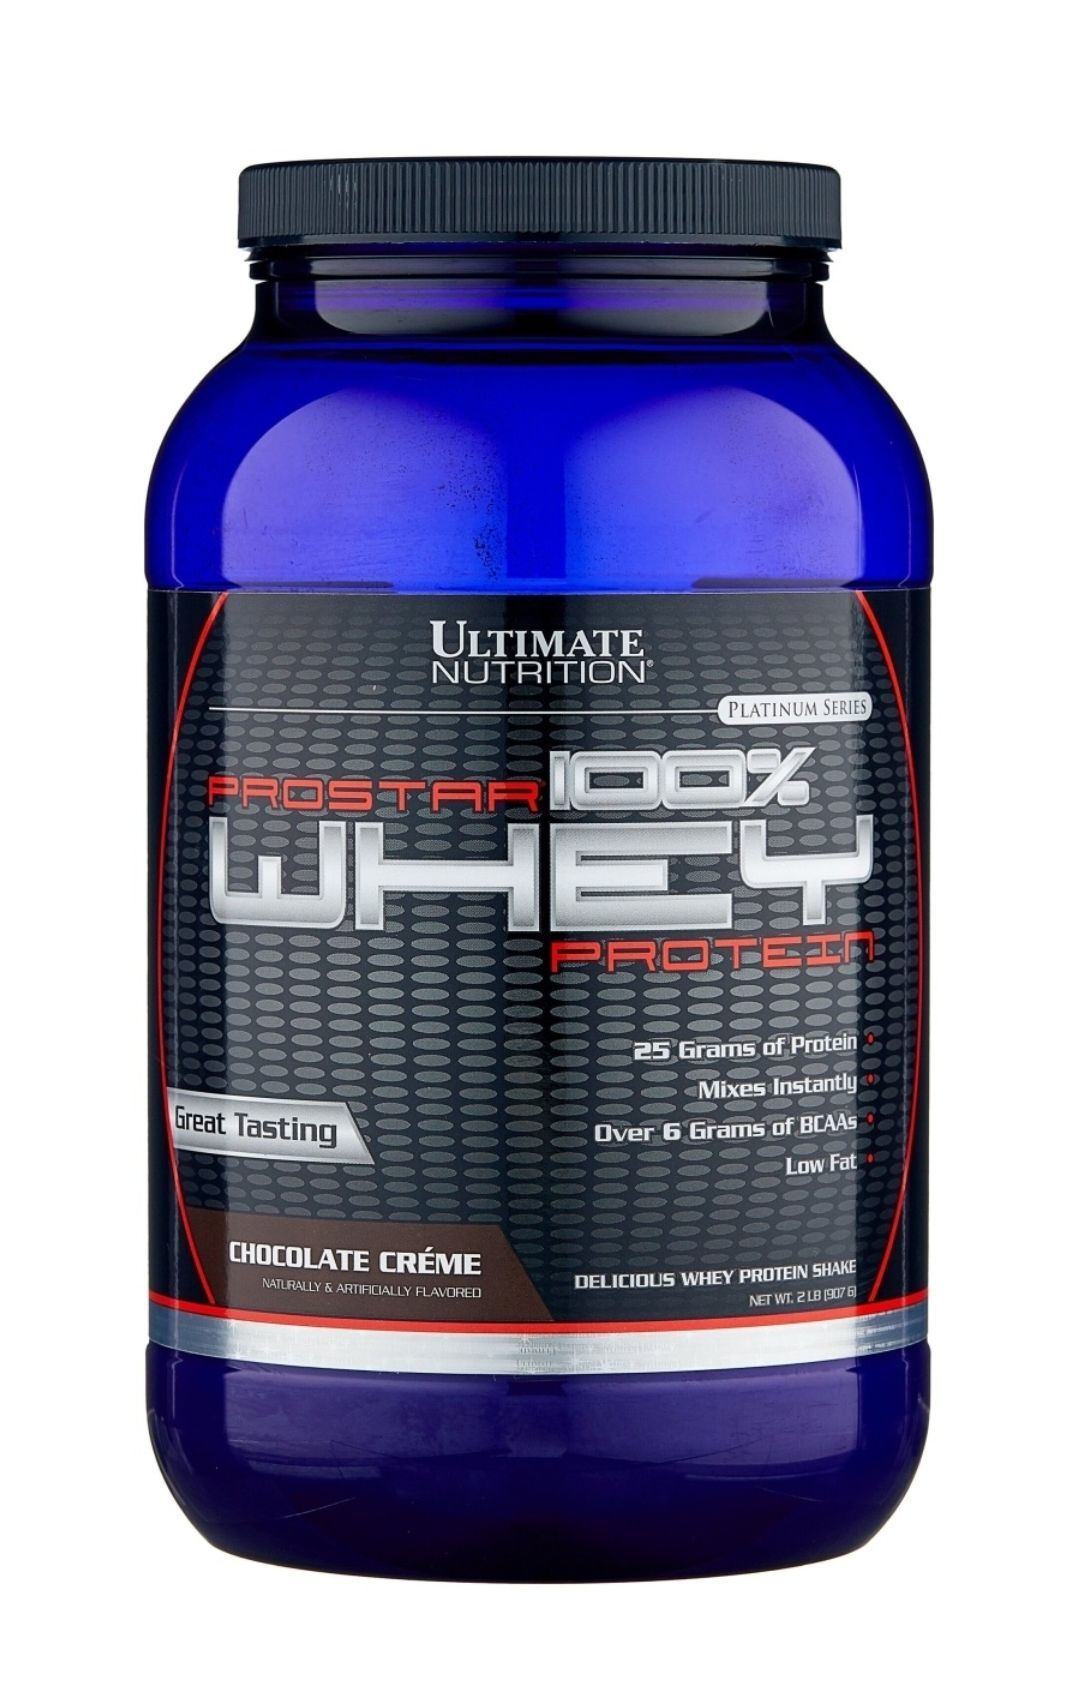 Ultimate nutrition купить. Ultimate Nutrition 100% Prostar Whey. Протеин Ultimate Nutrition Prostar 100% Whey Protein. Ultimate Nutrition Prostar Whey, 907 гр. Протеин Prostar 100 Whey.